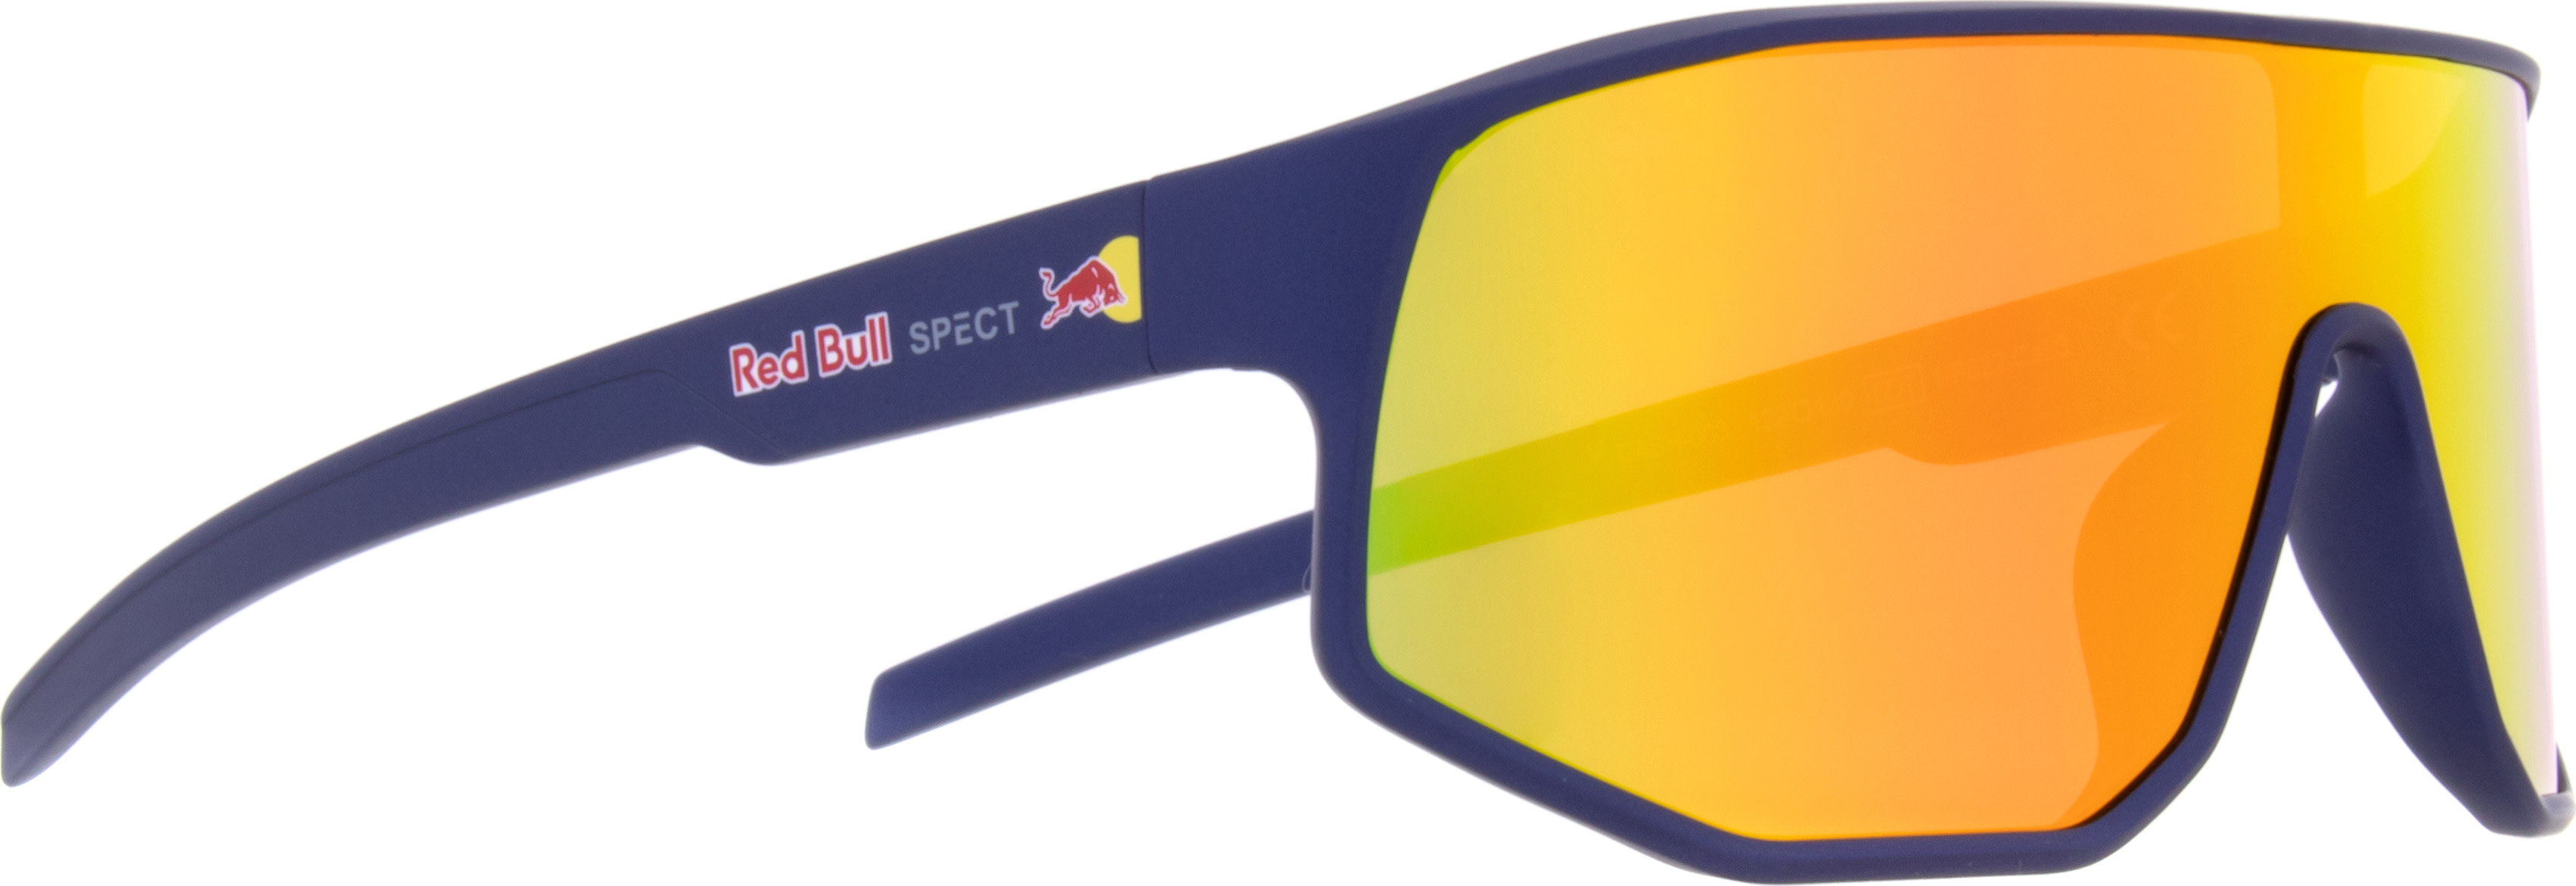 Red Bull SPECT Dash Blue OneSize, Blue/Brown/Red Mirror